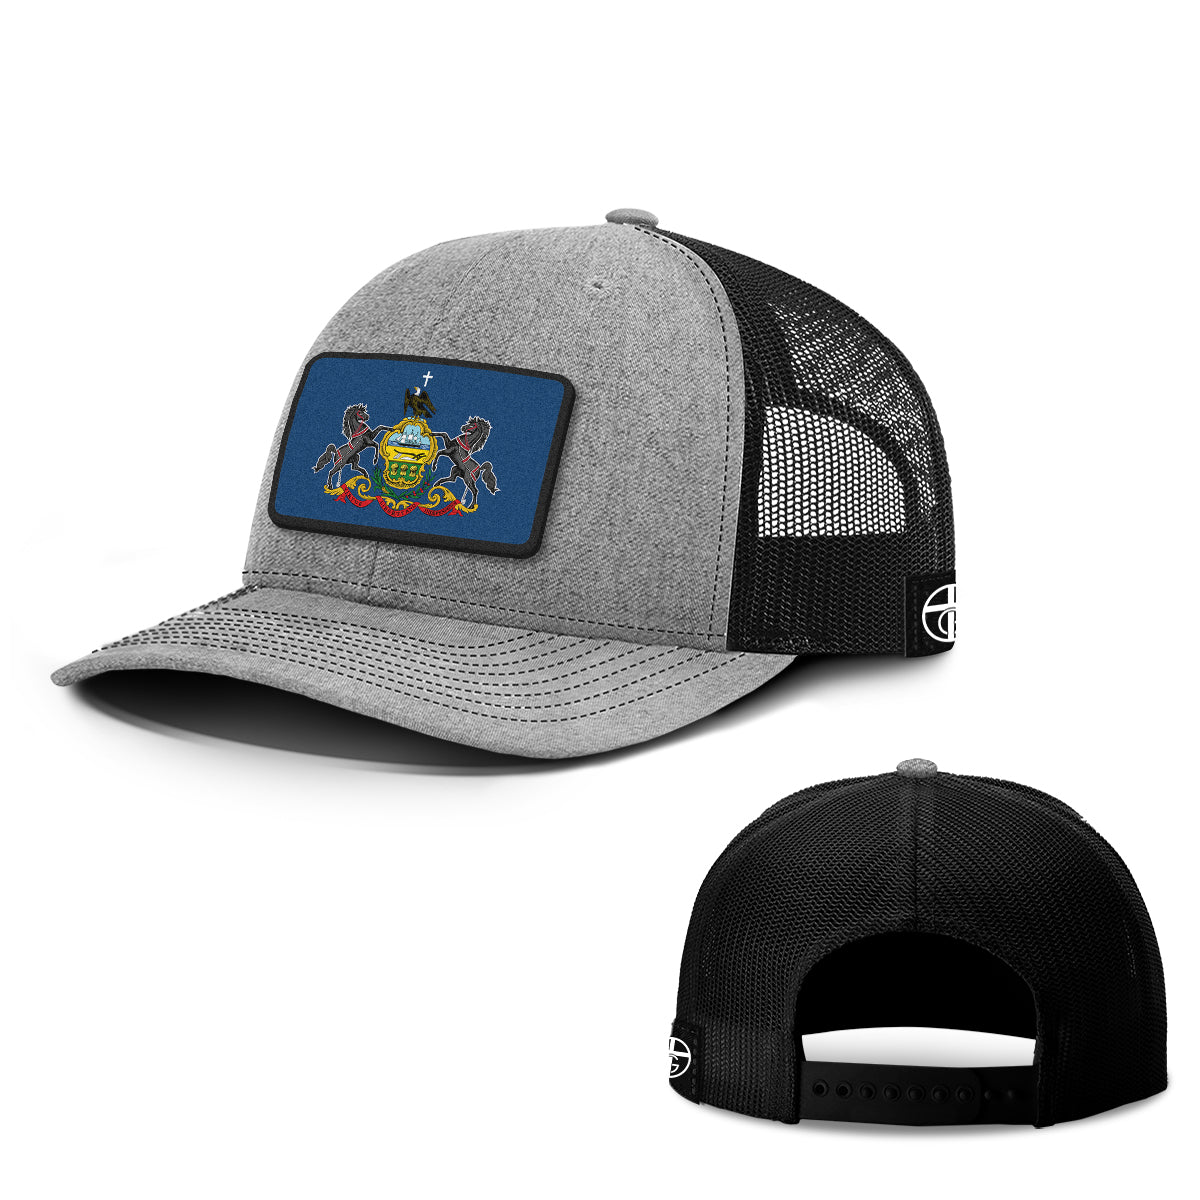 Pennsylvania is God’s Country Patch Hats